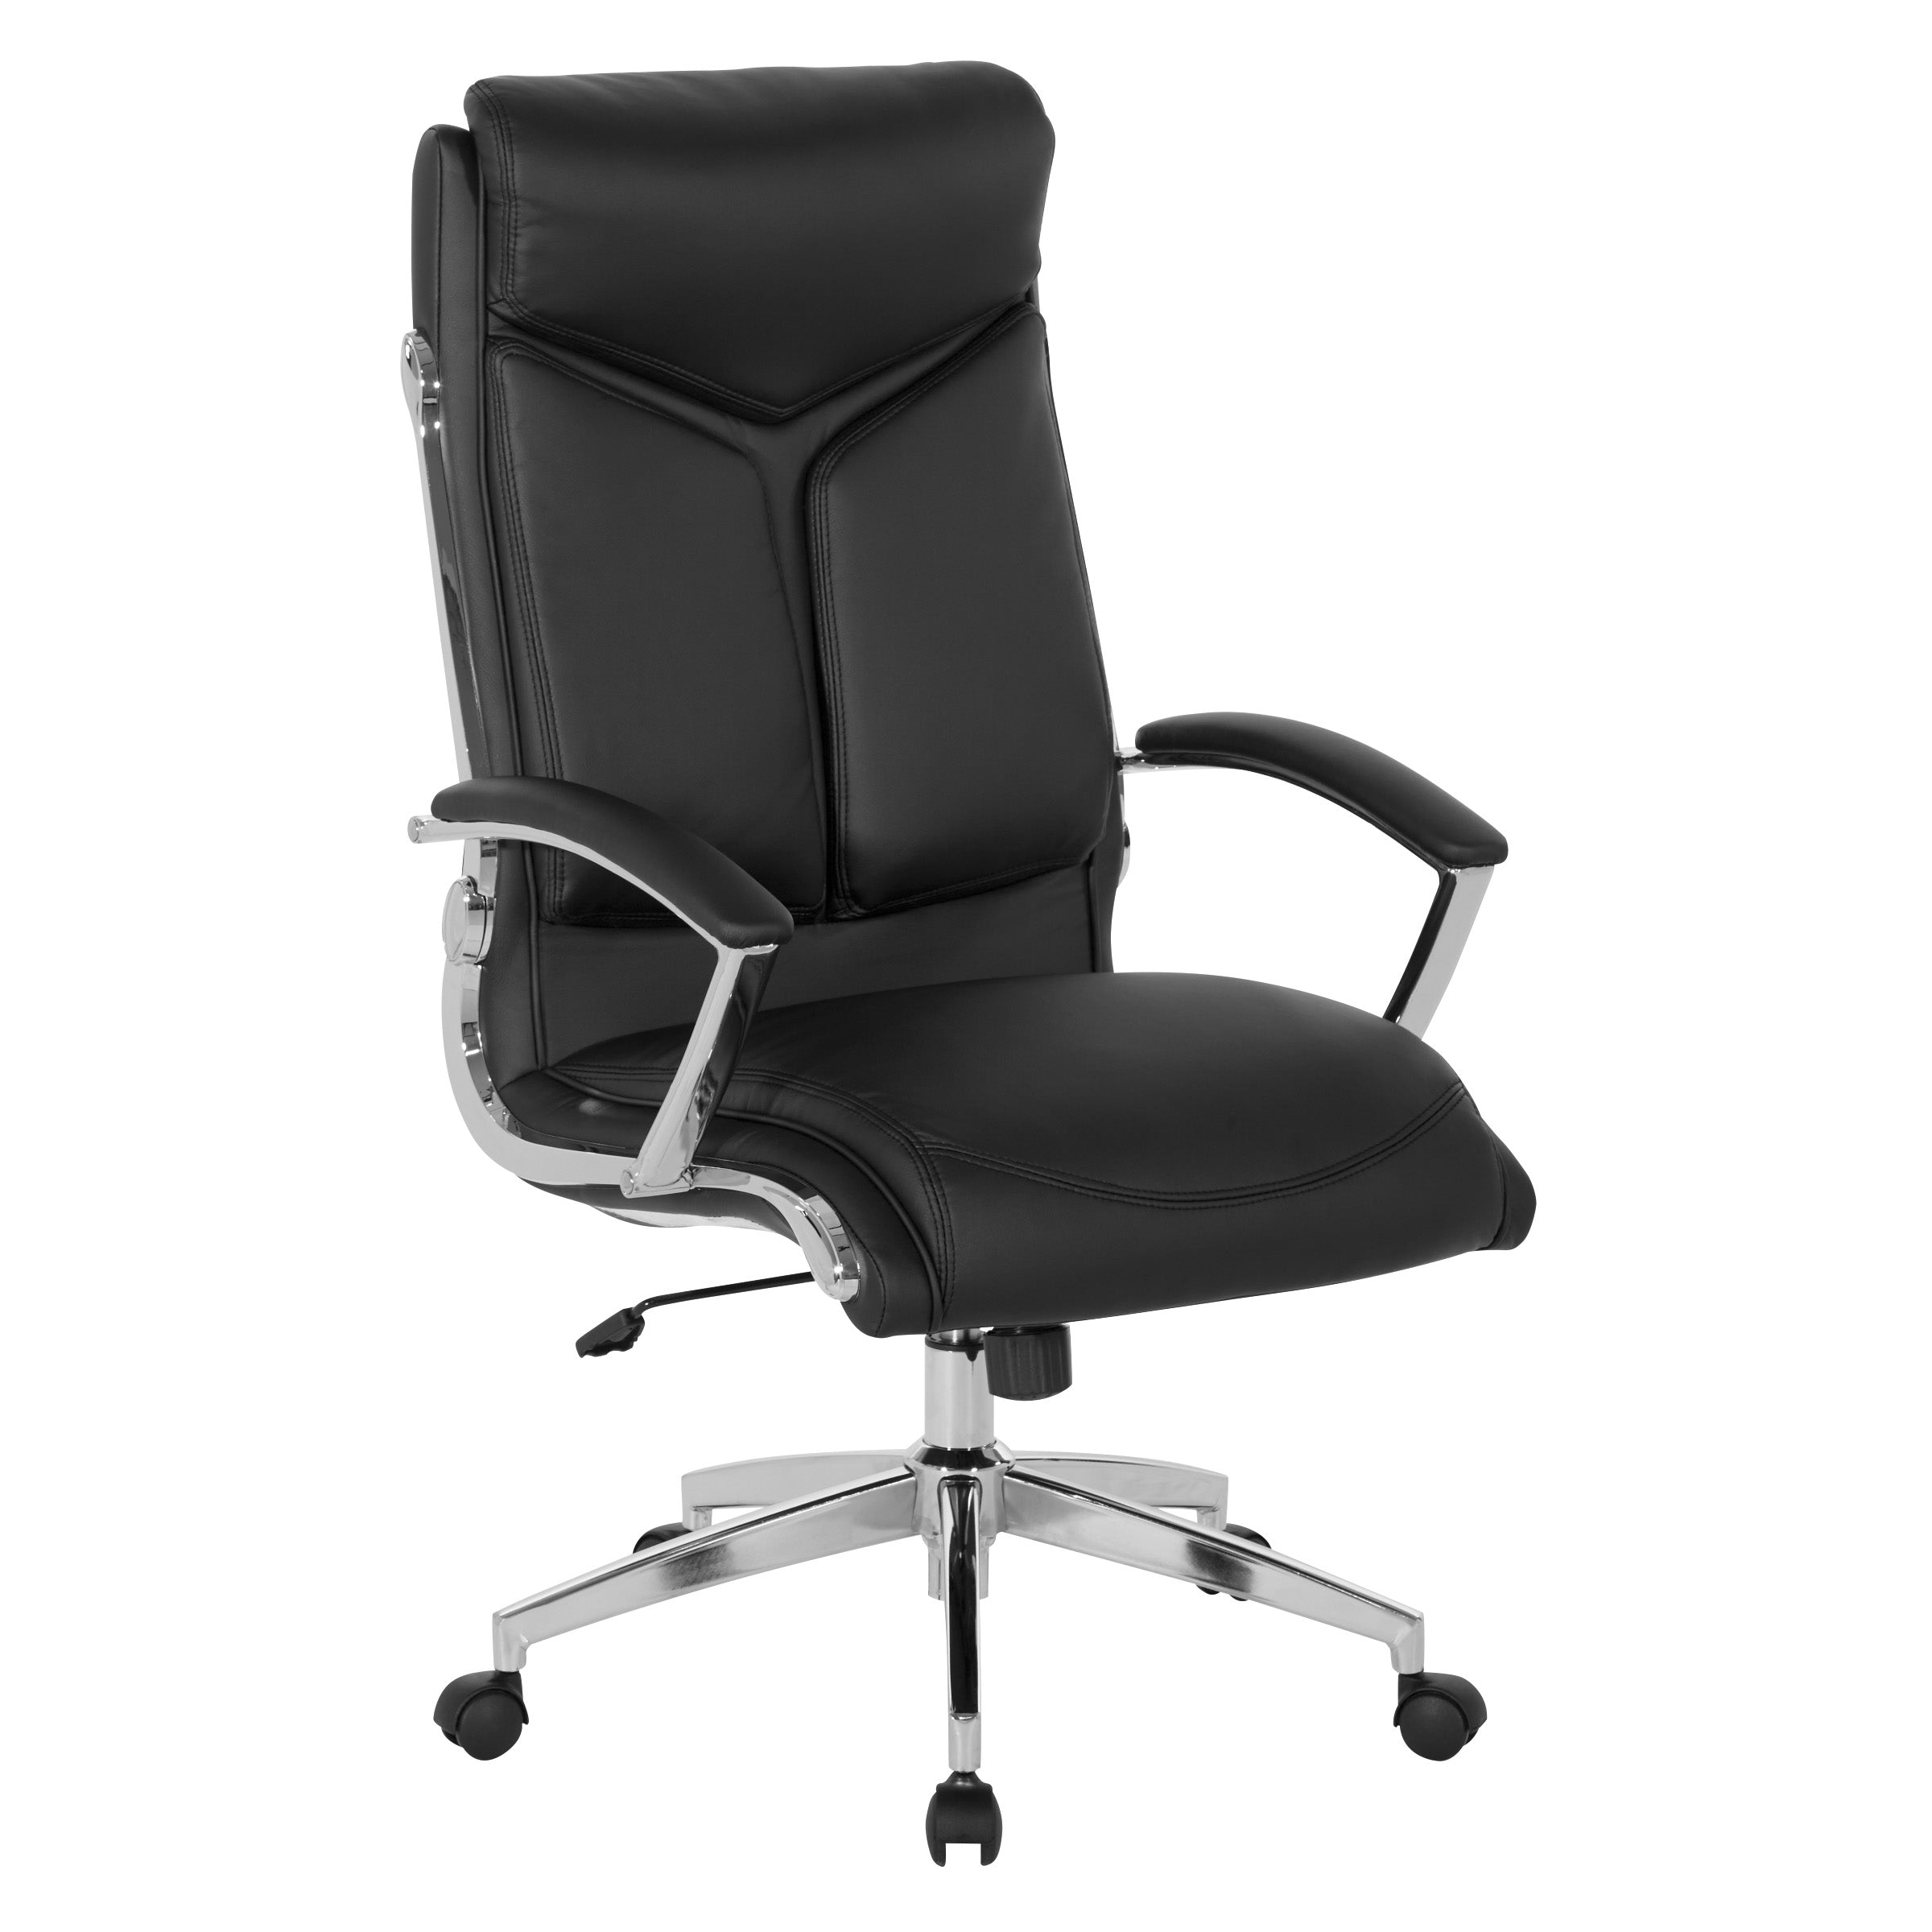 FL90071C - Executive High-Back Faux Leather Chair by Office Star